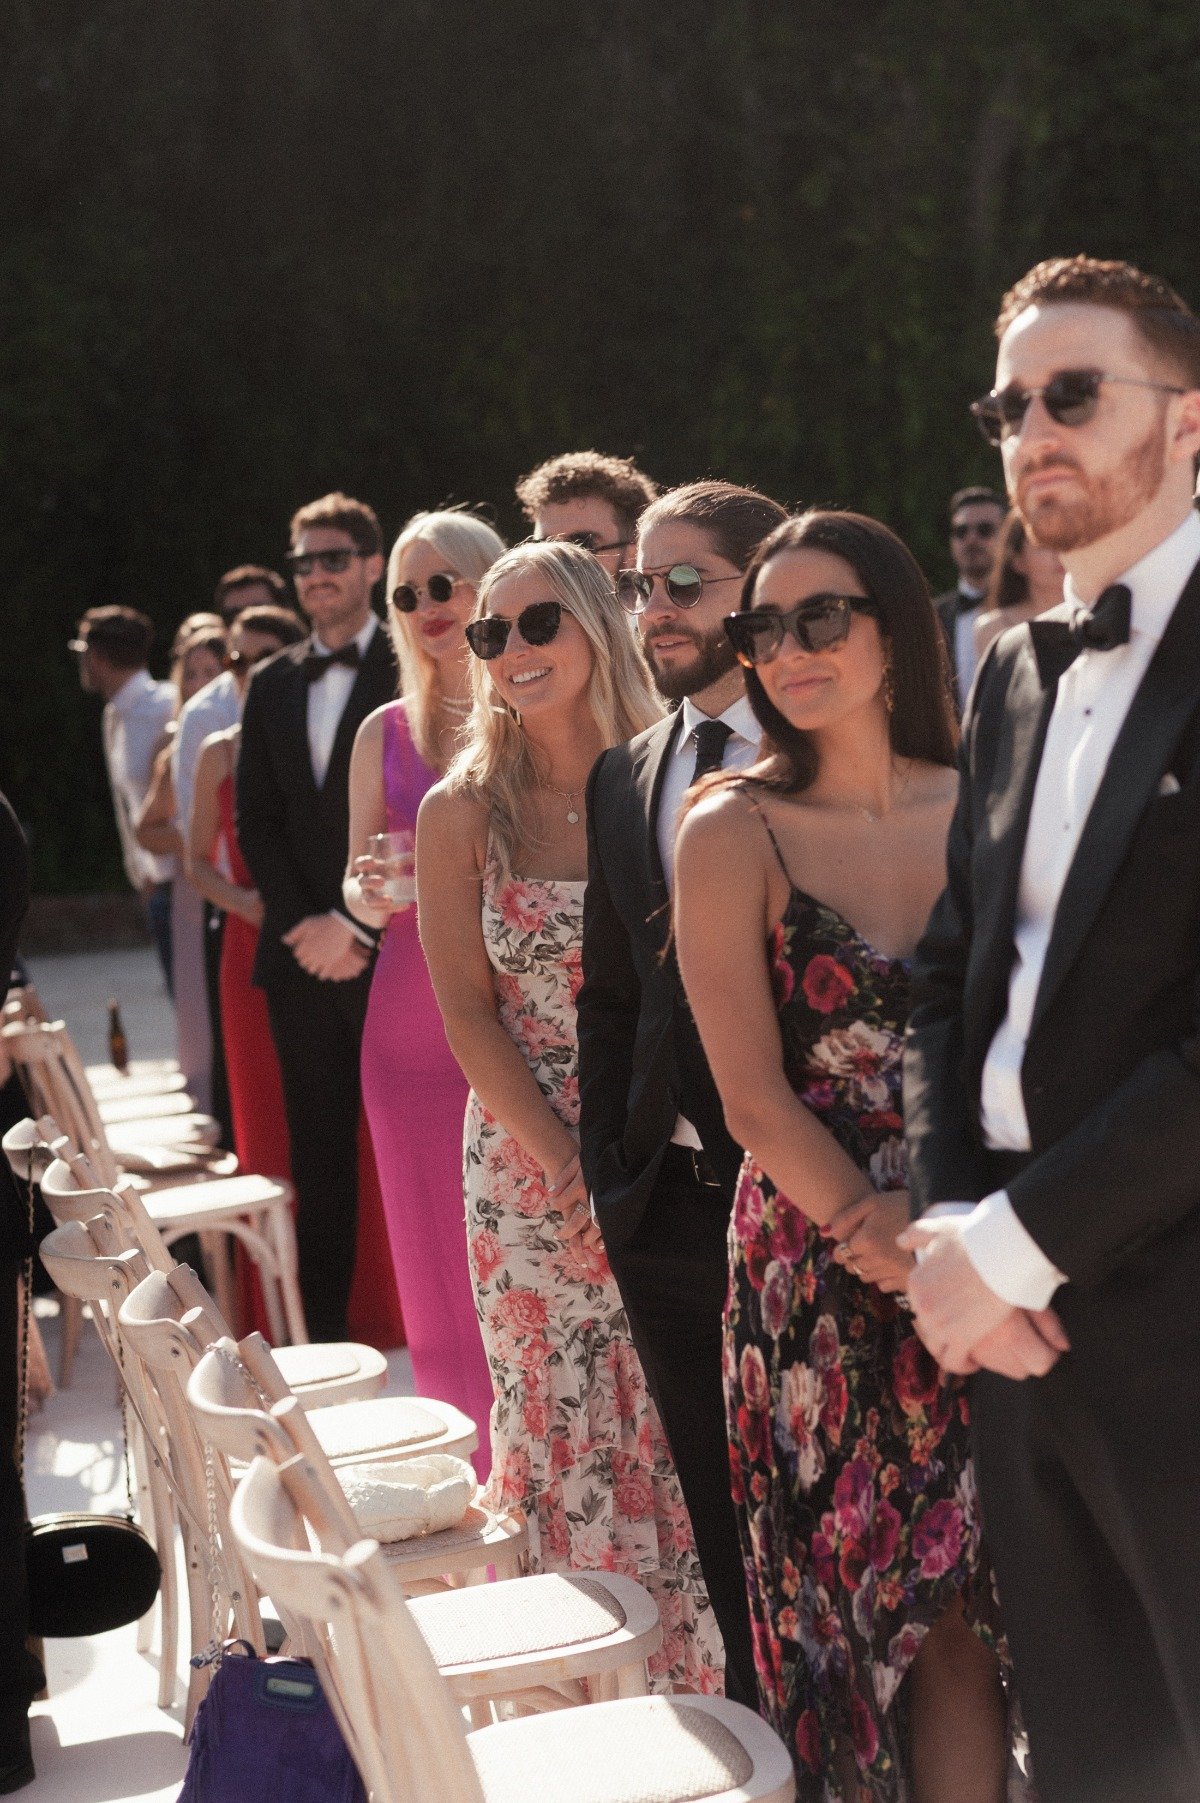 Guests standing in sunglasses